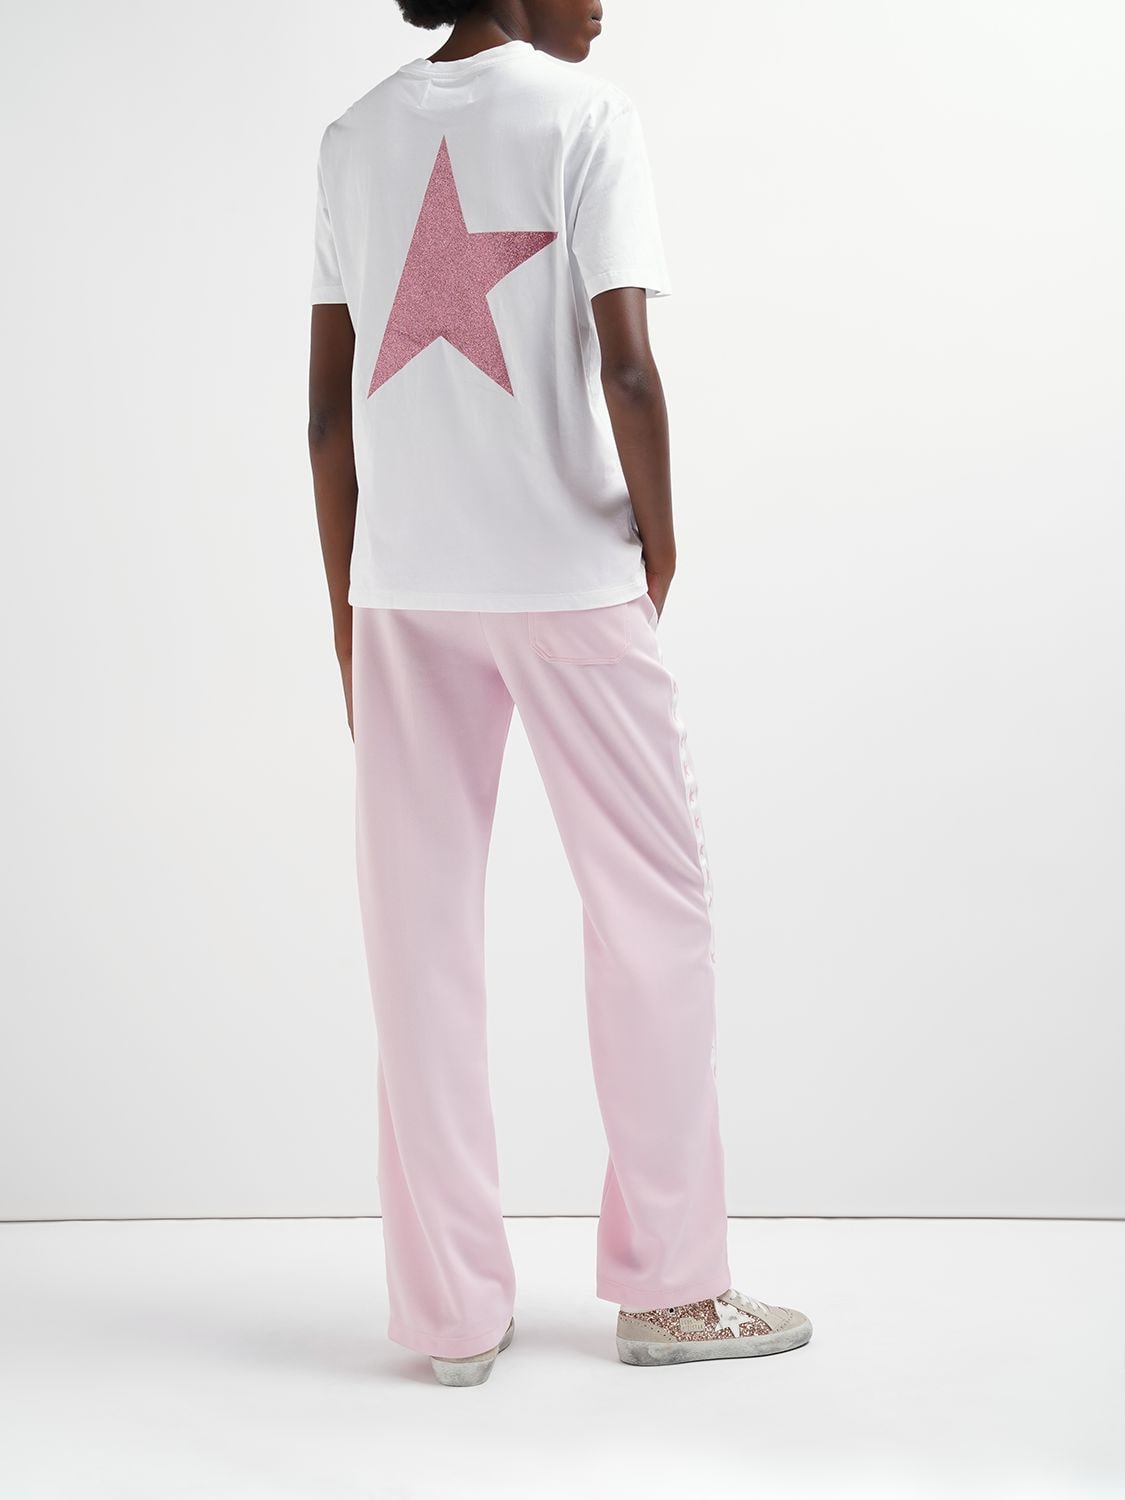 Shop Golden Goose Star Glittered Cotton Jersey T-shirt In White,pink